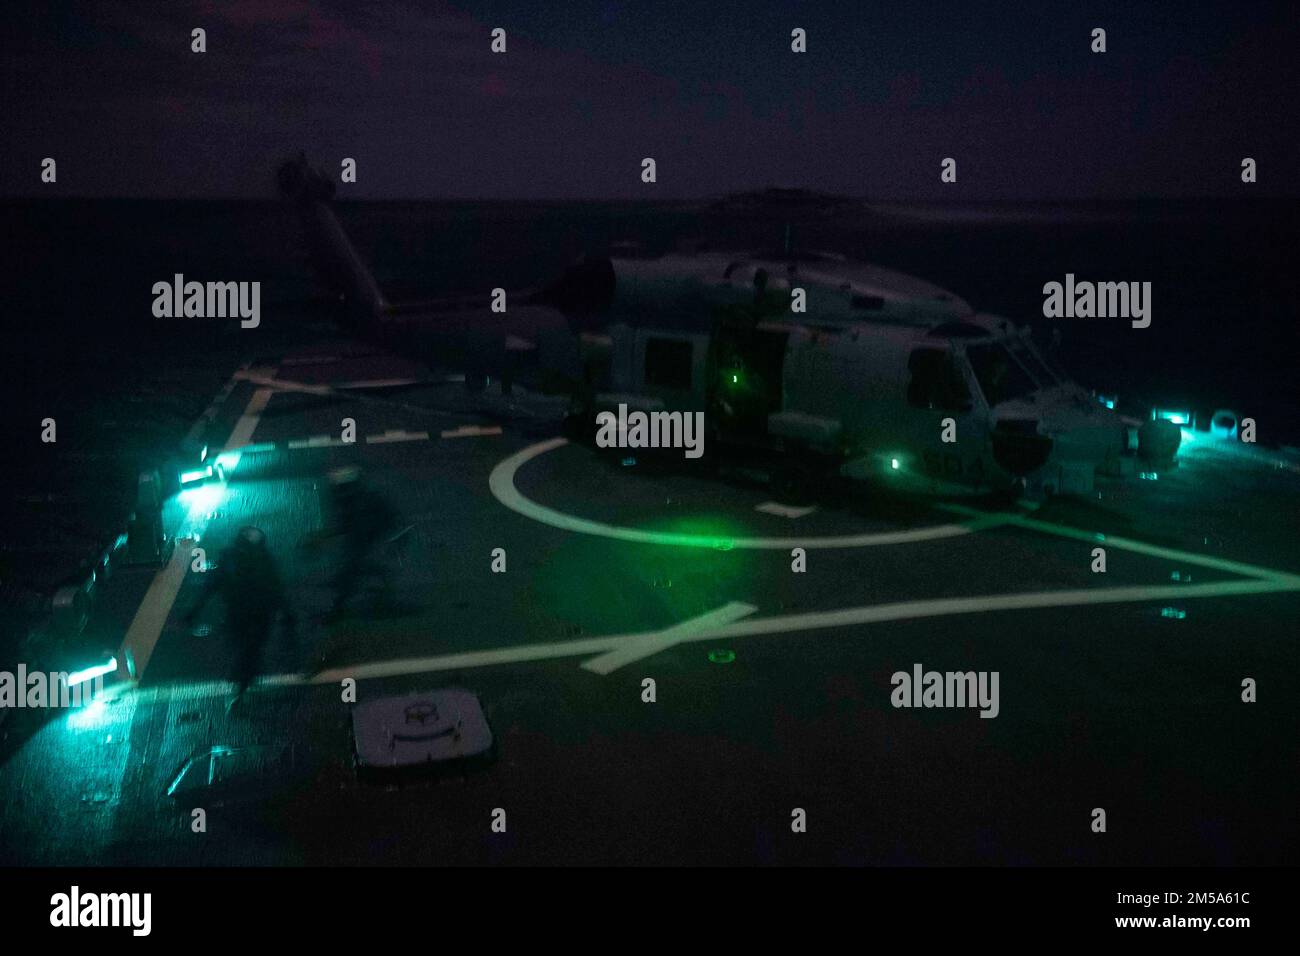 220214-N-QY794-1213 IONIAN SEA (Feb. 14, 2022) An MH-60R Sea Hawk helicopter, assigned to the “Proud Warriors” of Helicopter Maritime Strike Squadron (HSM) 72, prepares to take off during nighttime deck landing qualifications on the flight deck of the Arleigh Burke-class guided-missile destroyer USS Gonzalez (DDG 66), Feb. 14, 2022. Gonzalez is deployed with the Harry S. Truman Carrier Strike Group on a scheduled deployment in the U.S. Sixth Fleet area of operations in support of naval operations to maintain maritime stability and security, and defend U.S. allied and partner interests in Europ Stock Photo